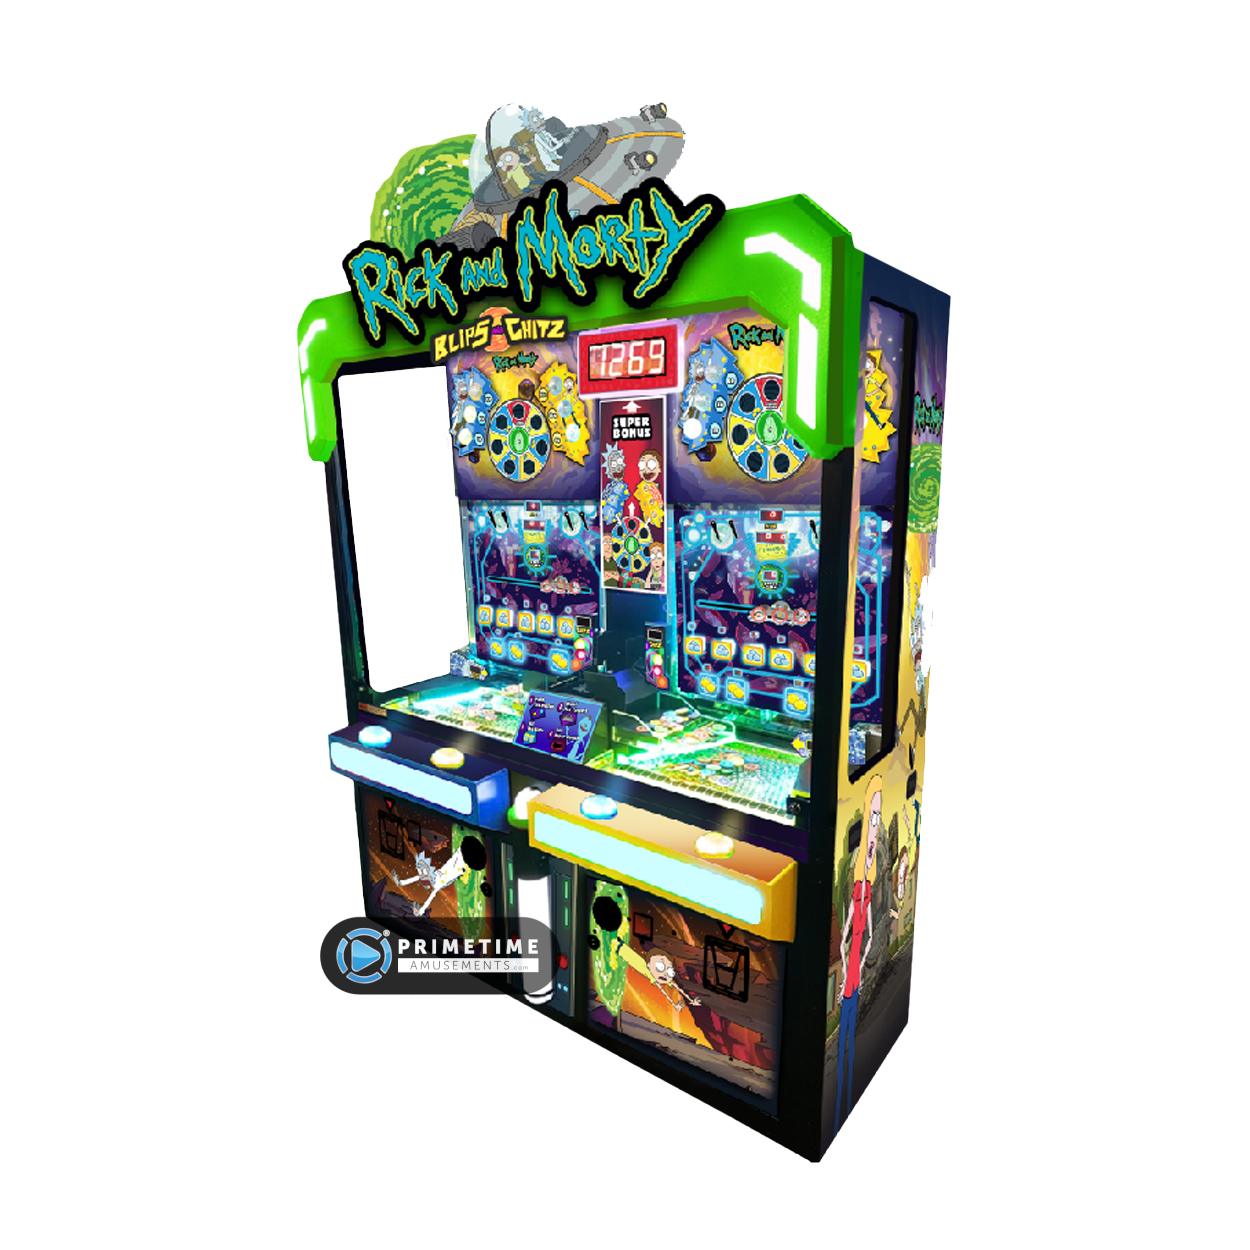 RICK AND MORTY BLIPS AND CHITZ by LAI Games